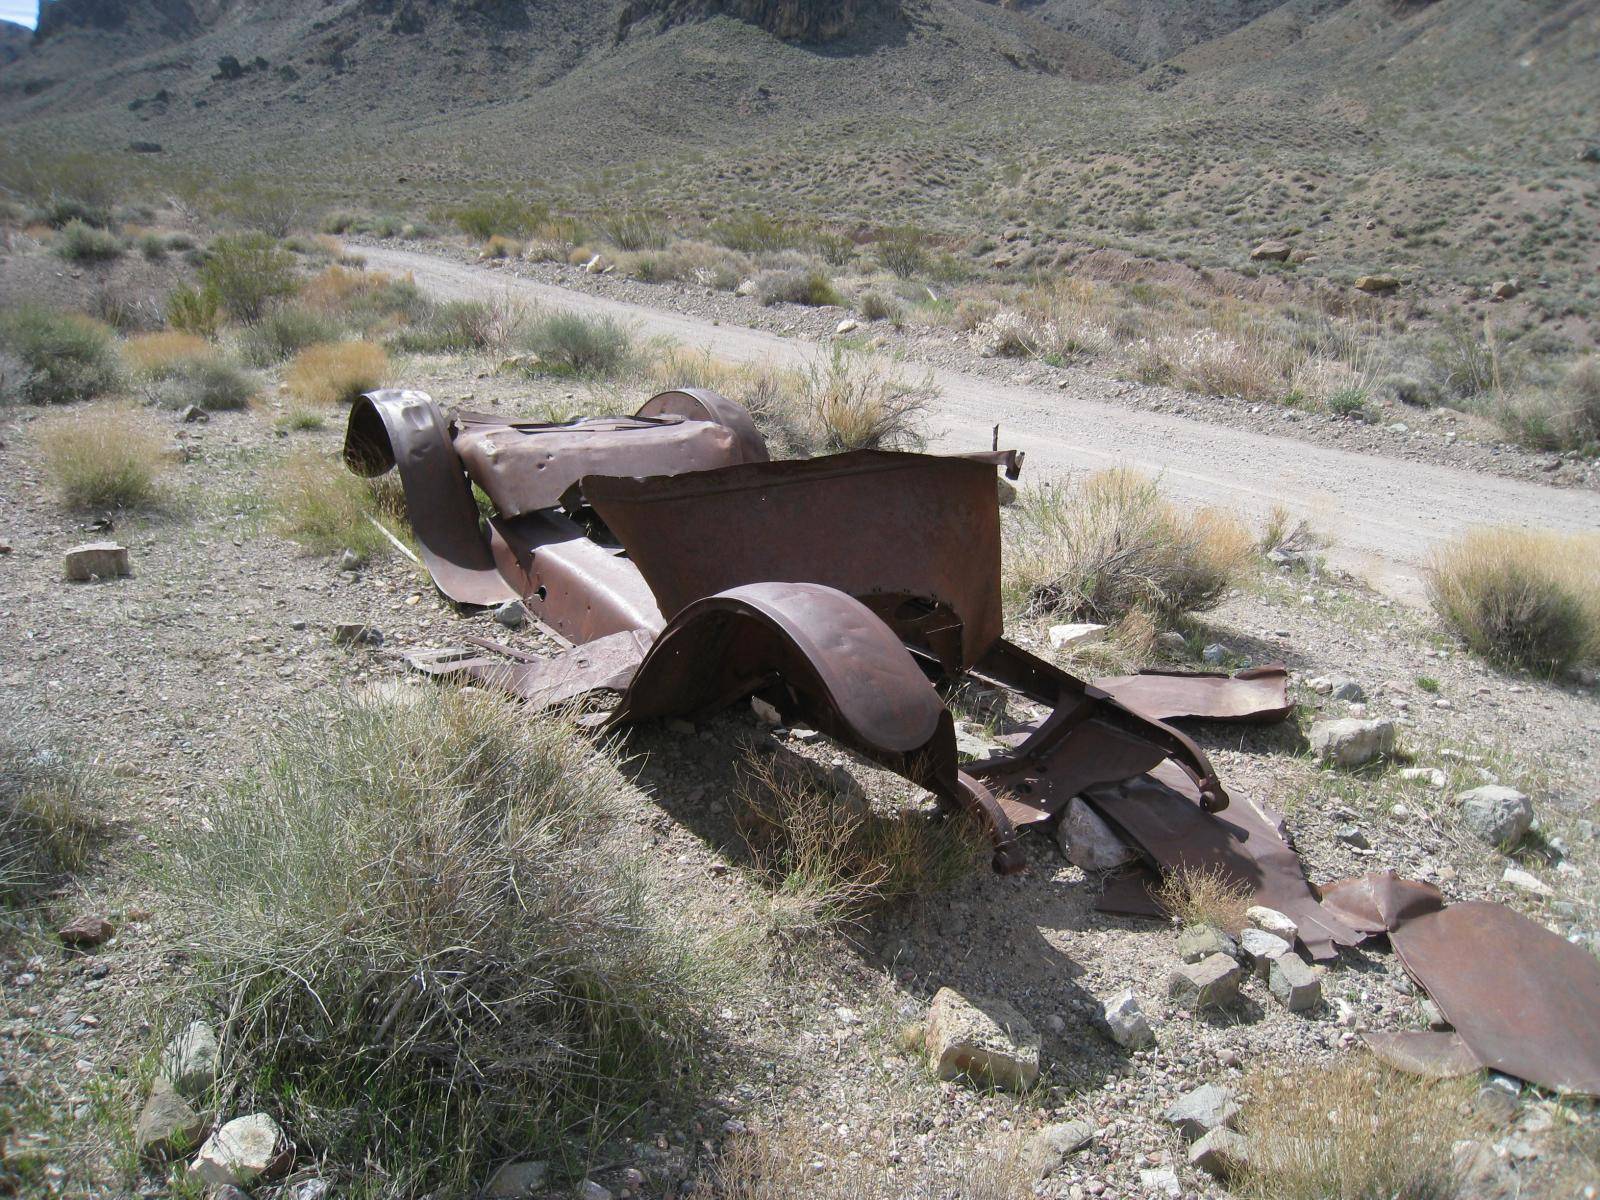 Rusting vehicle in the ghost town of Leadfield, Death Valley National Park, California